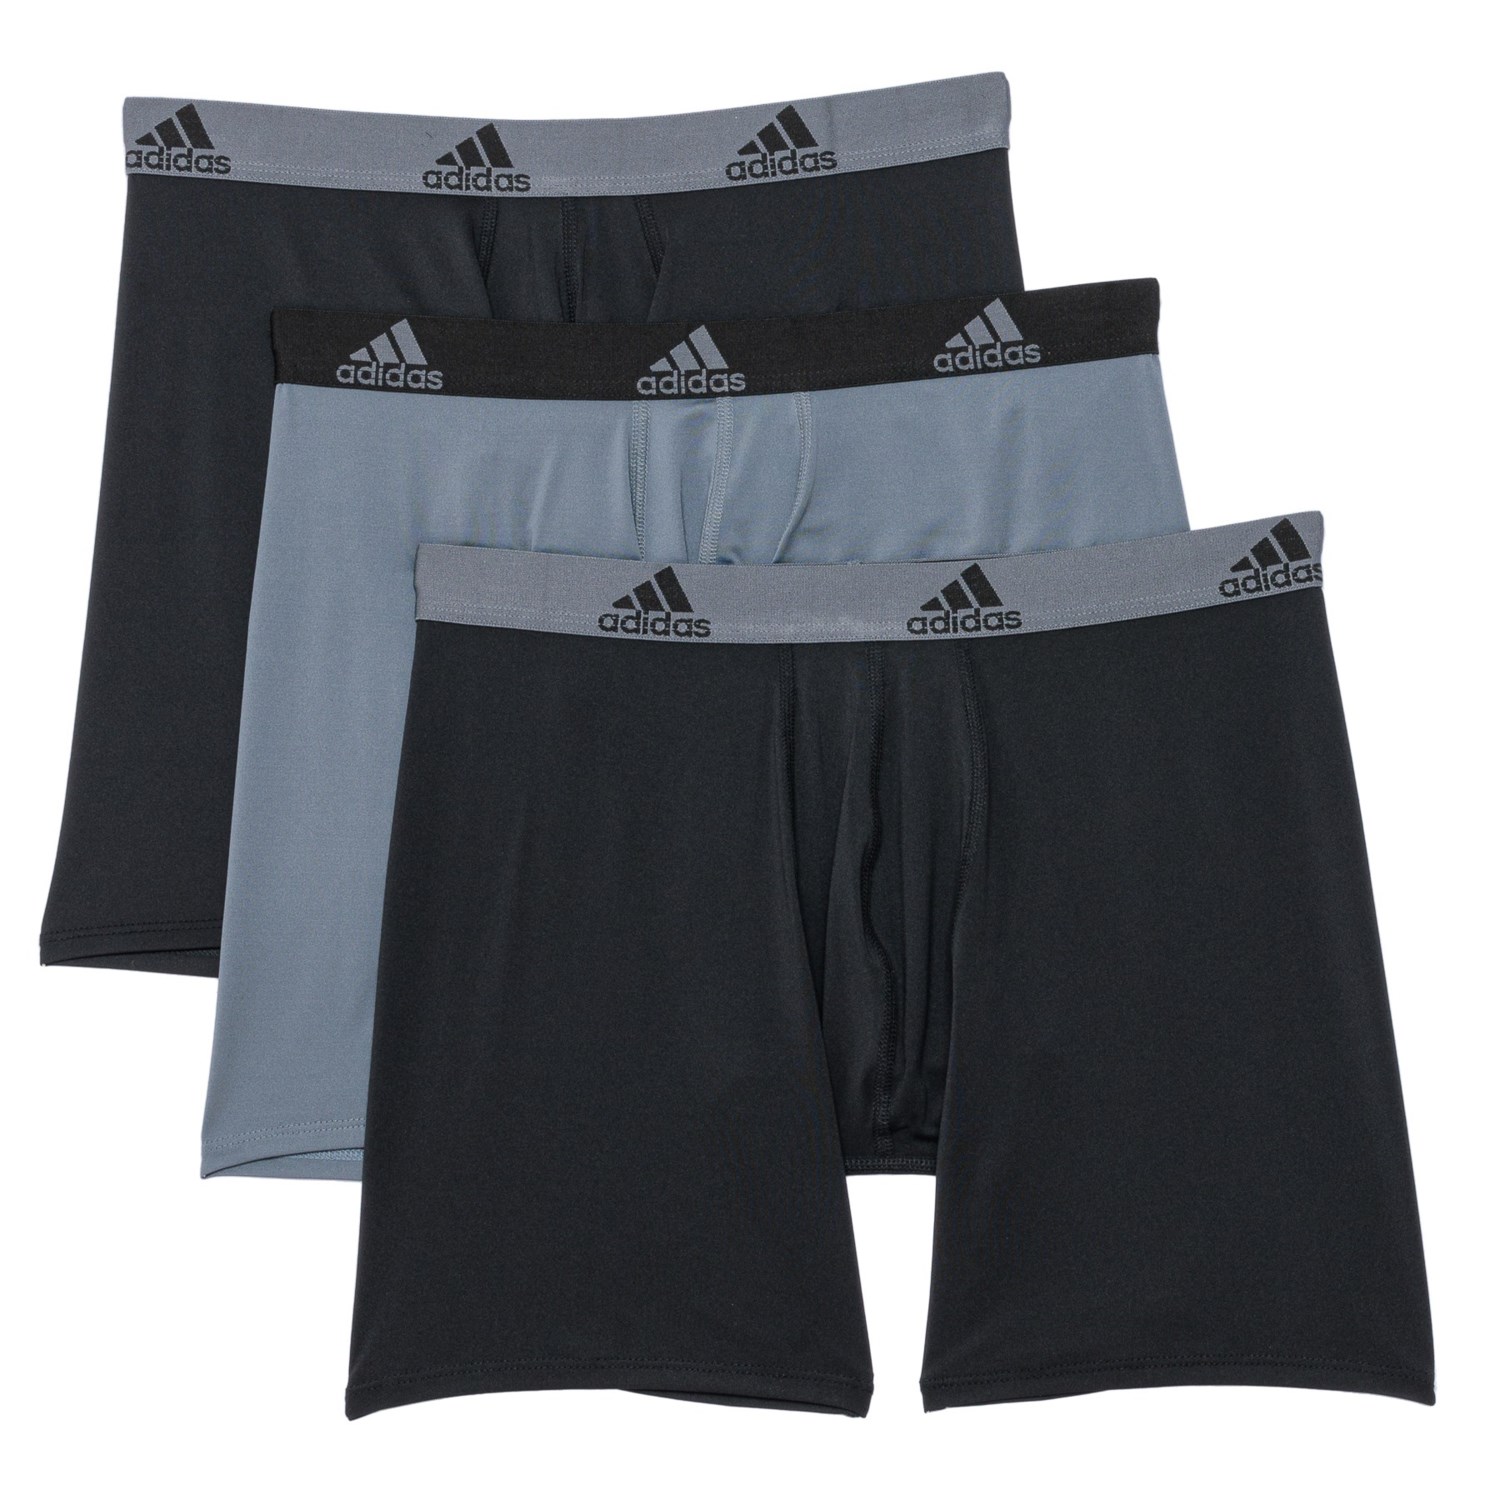 A Sports Blogger Reviews The Adidas Sport Performance Underwear